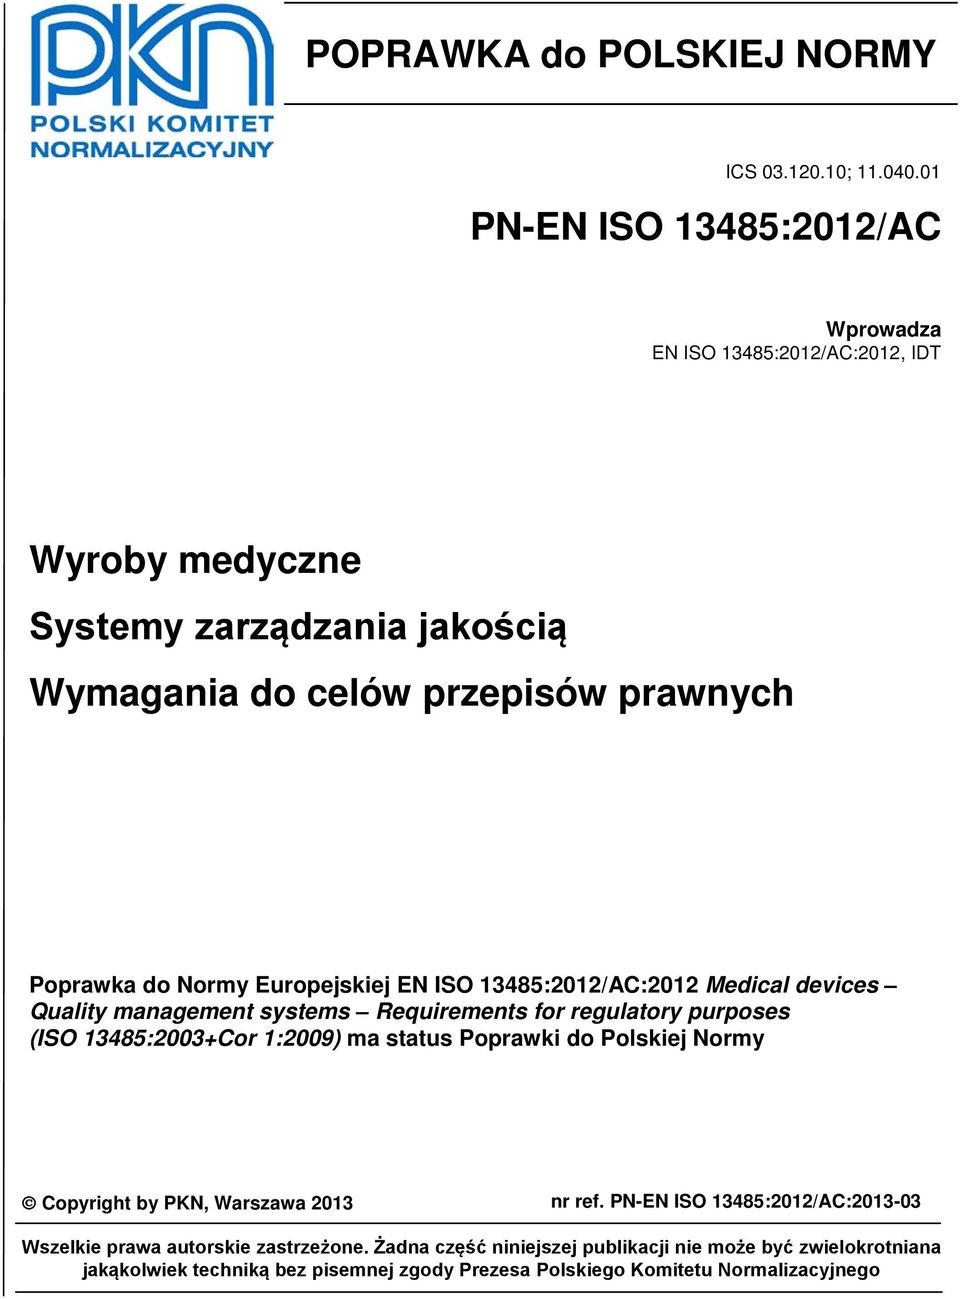 Normy Europejskiej EN ISO 13485:2012/AC:2012 Medical devices Quality management systems Requirements for regulatory purposes (ISO 13485:2003+Cor 1:2009) ma status